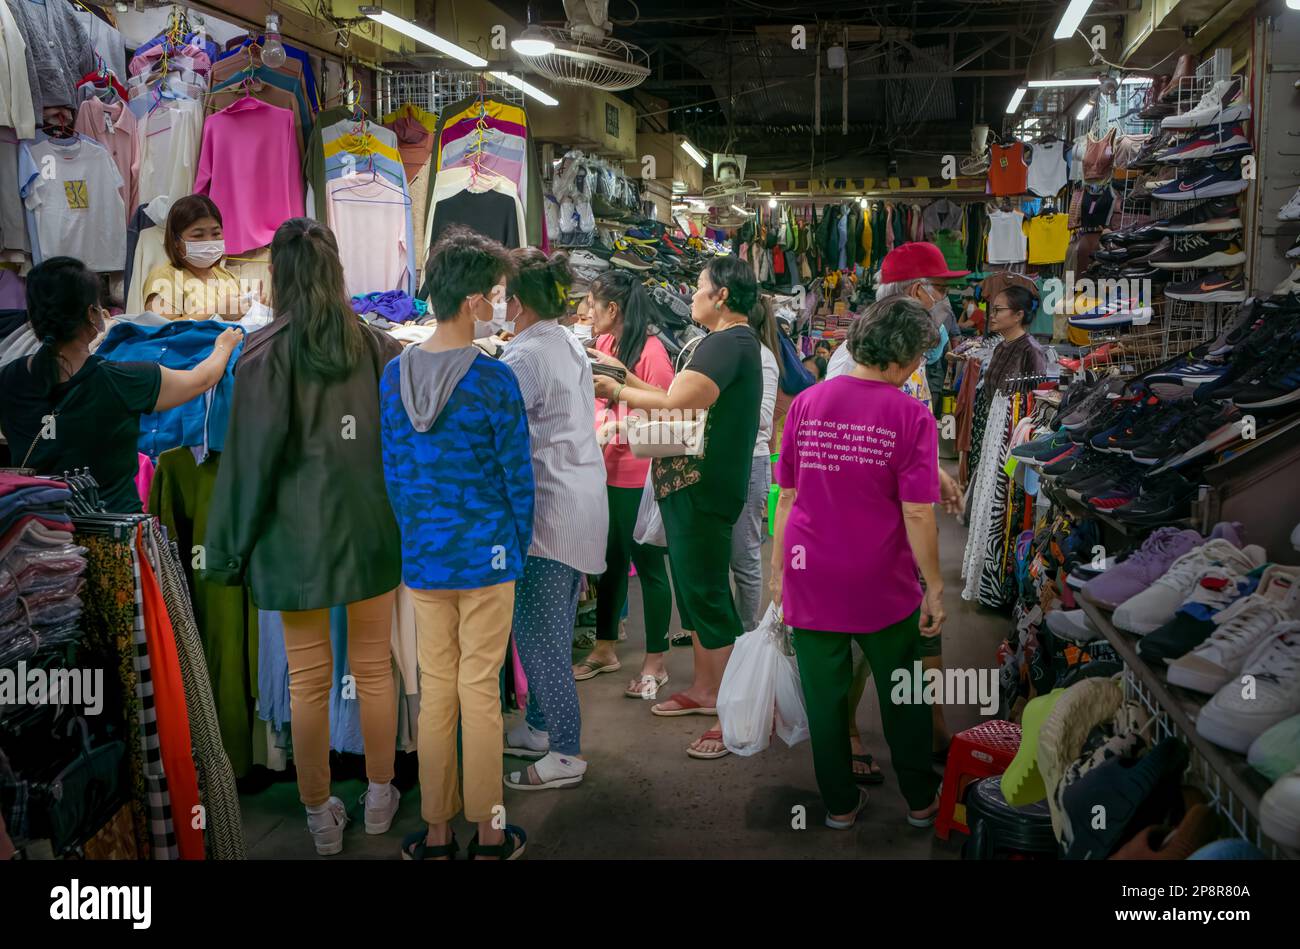 A crowd of shoppers rummage through clothes on a stall within the Russian Market in Phnom Penh, Cambodia. Stock Photo